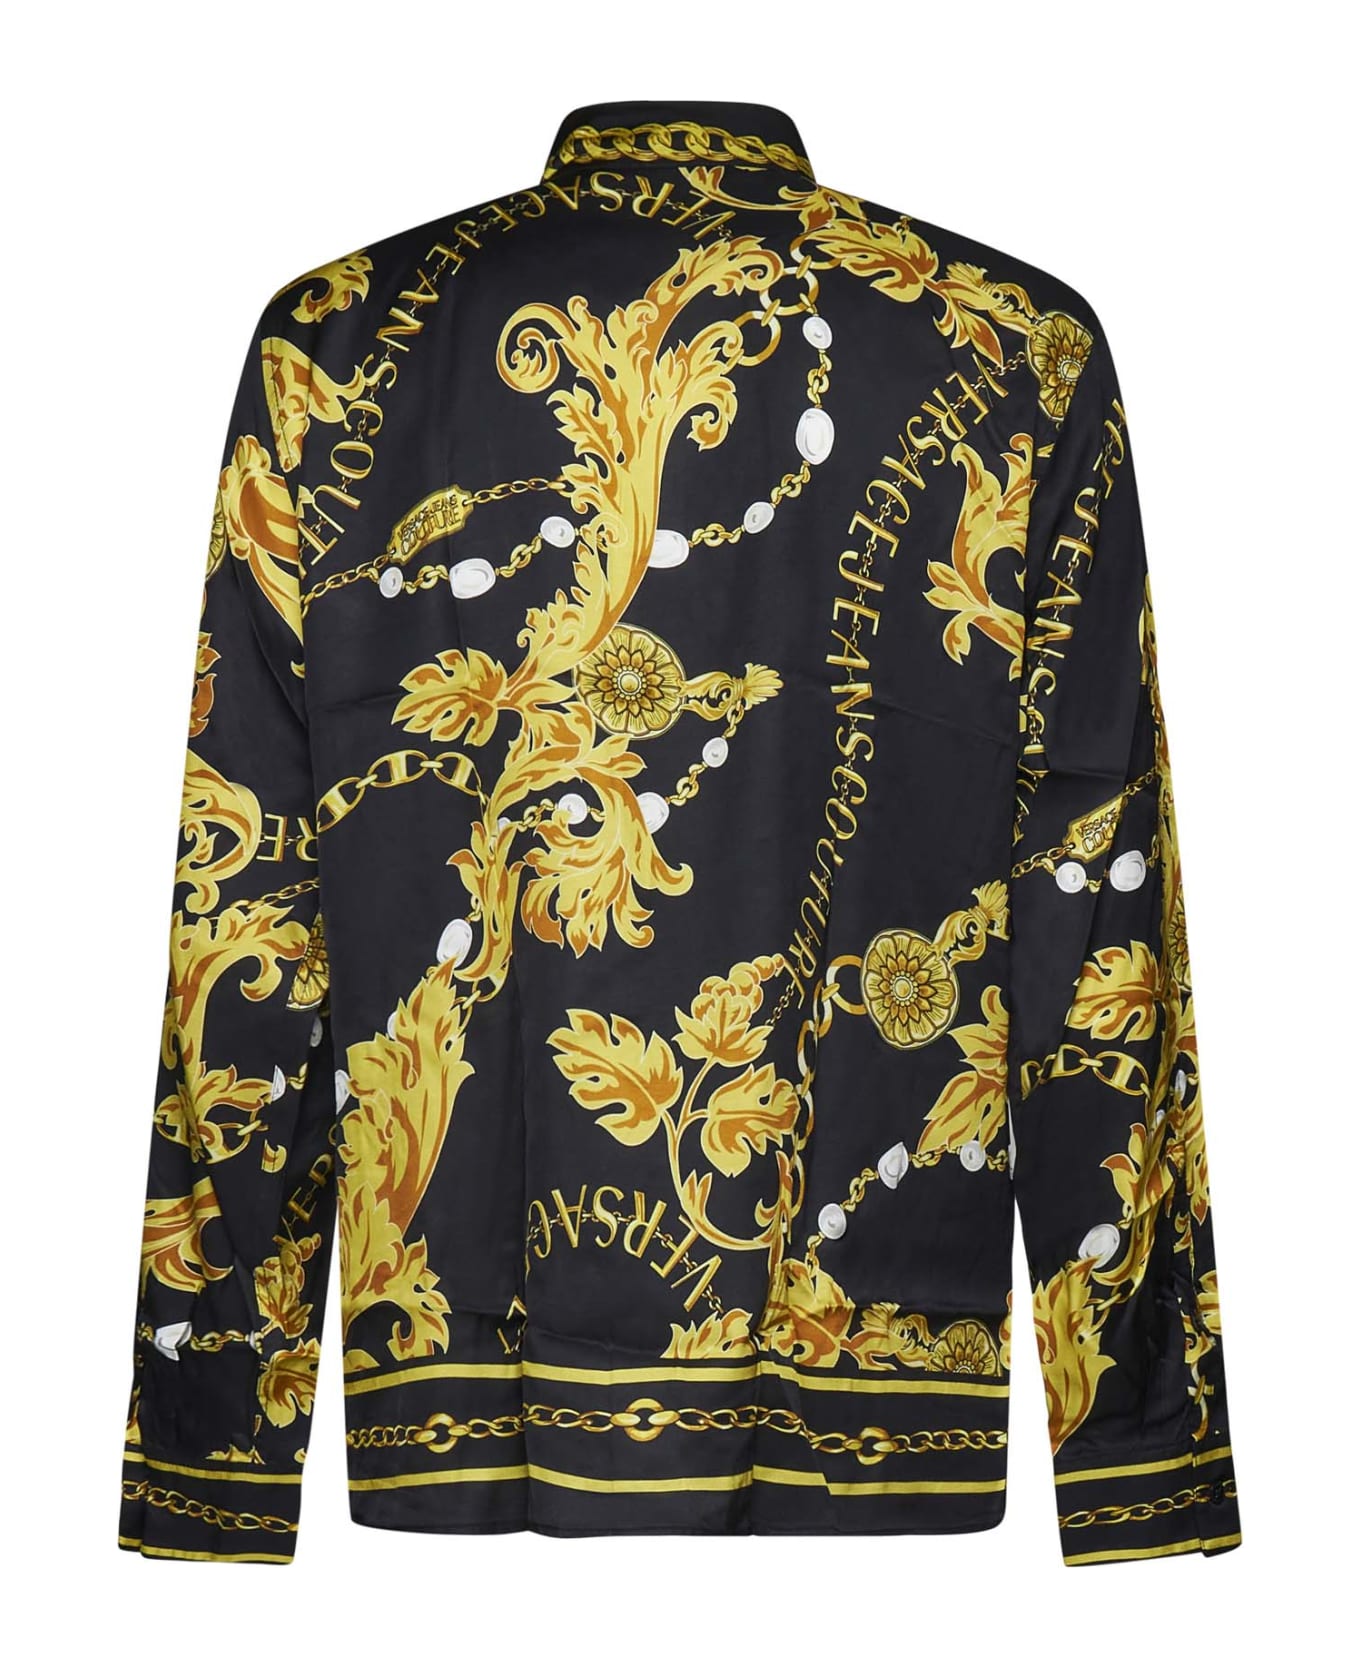 Versace Jeans Couture Chain Couture Print Shirt - Black Gold